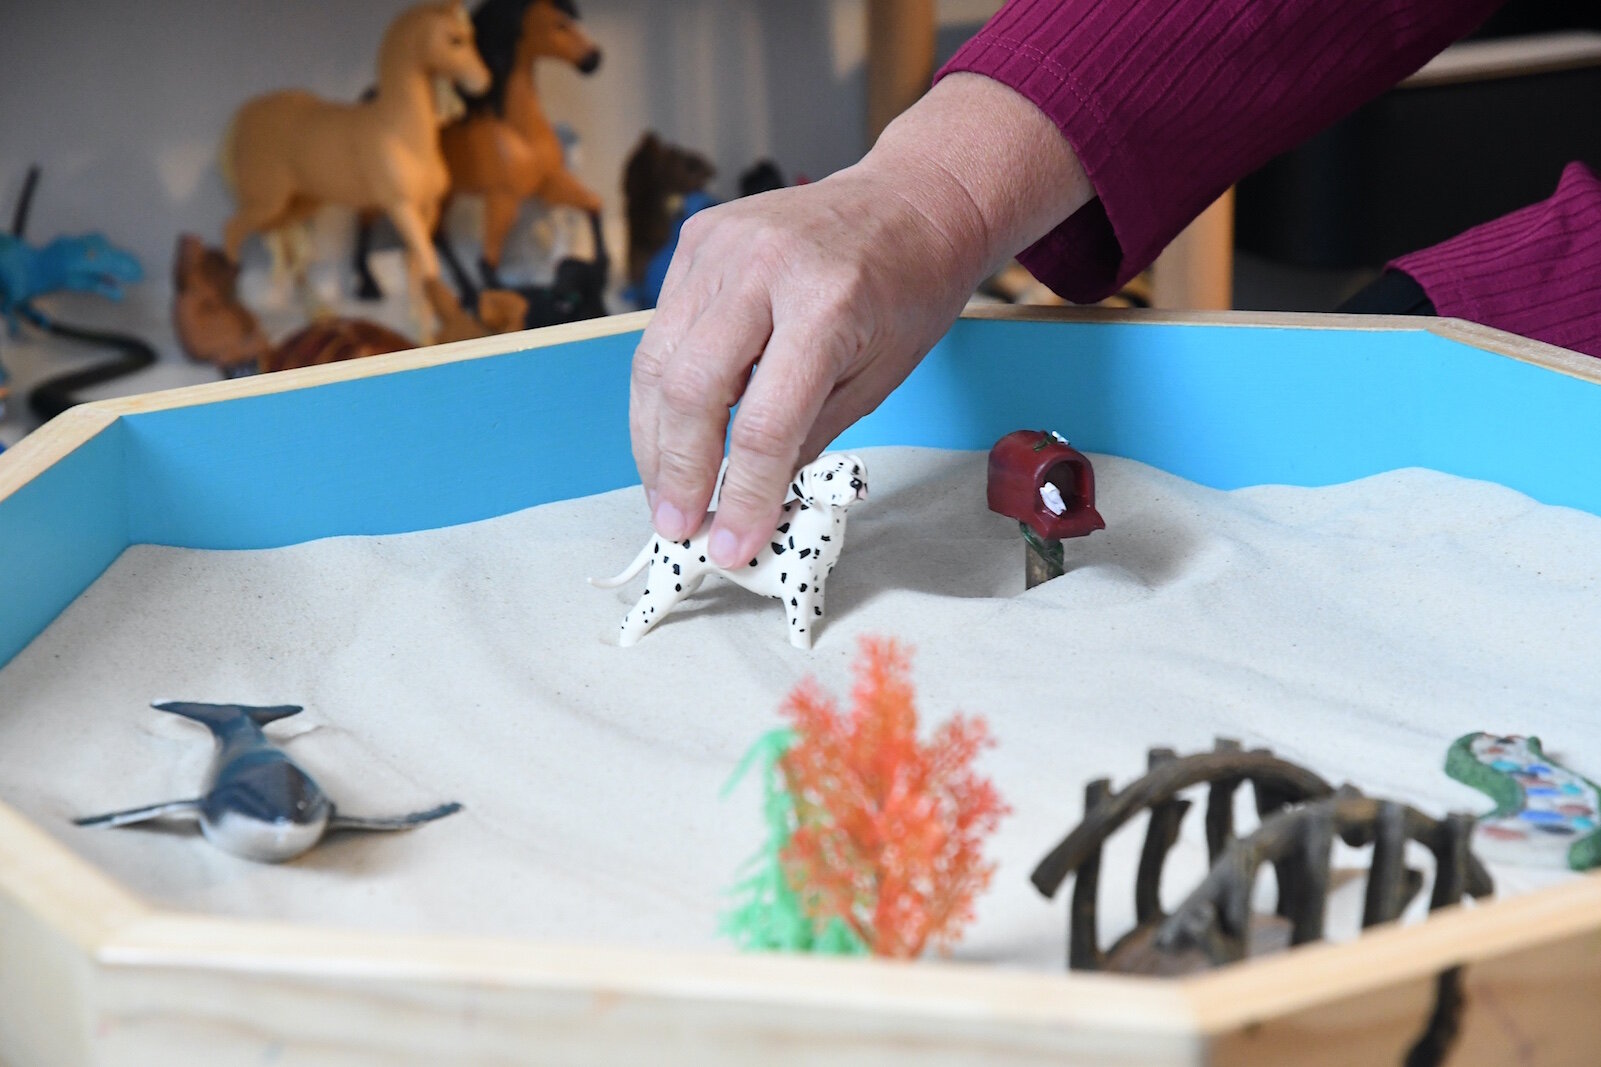 Sherrie Schanzenbaker places an item in the sand tray at the Restoration Center